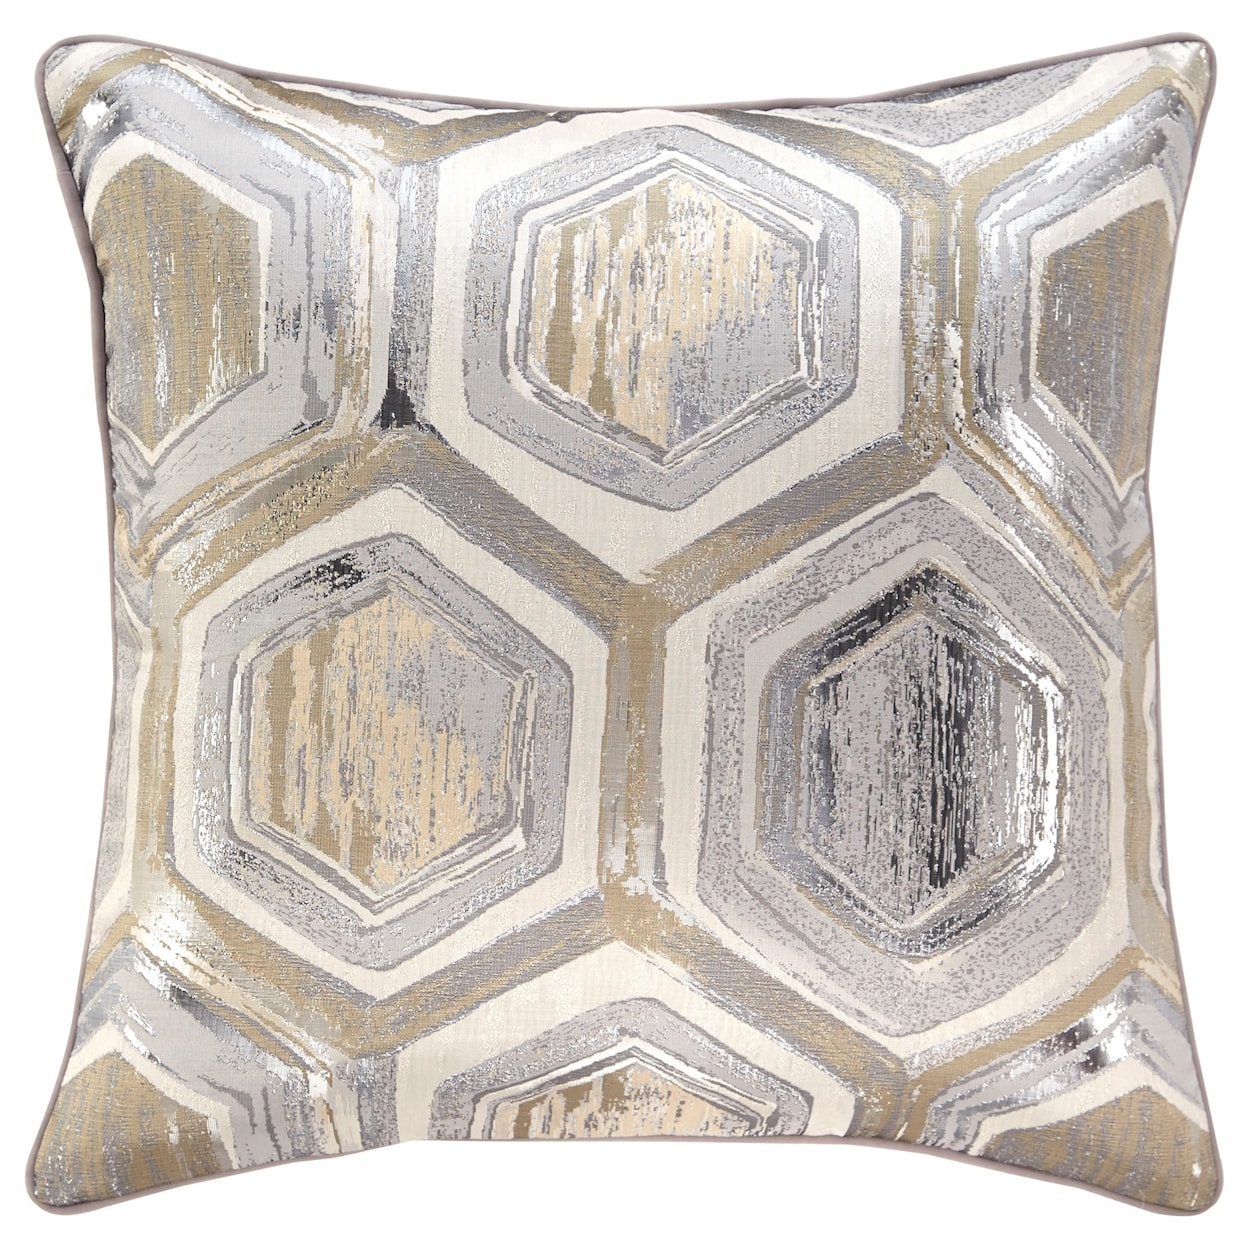 Signature Design by Ashley Meiling Meiling Metallic Pillow